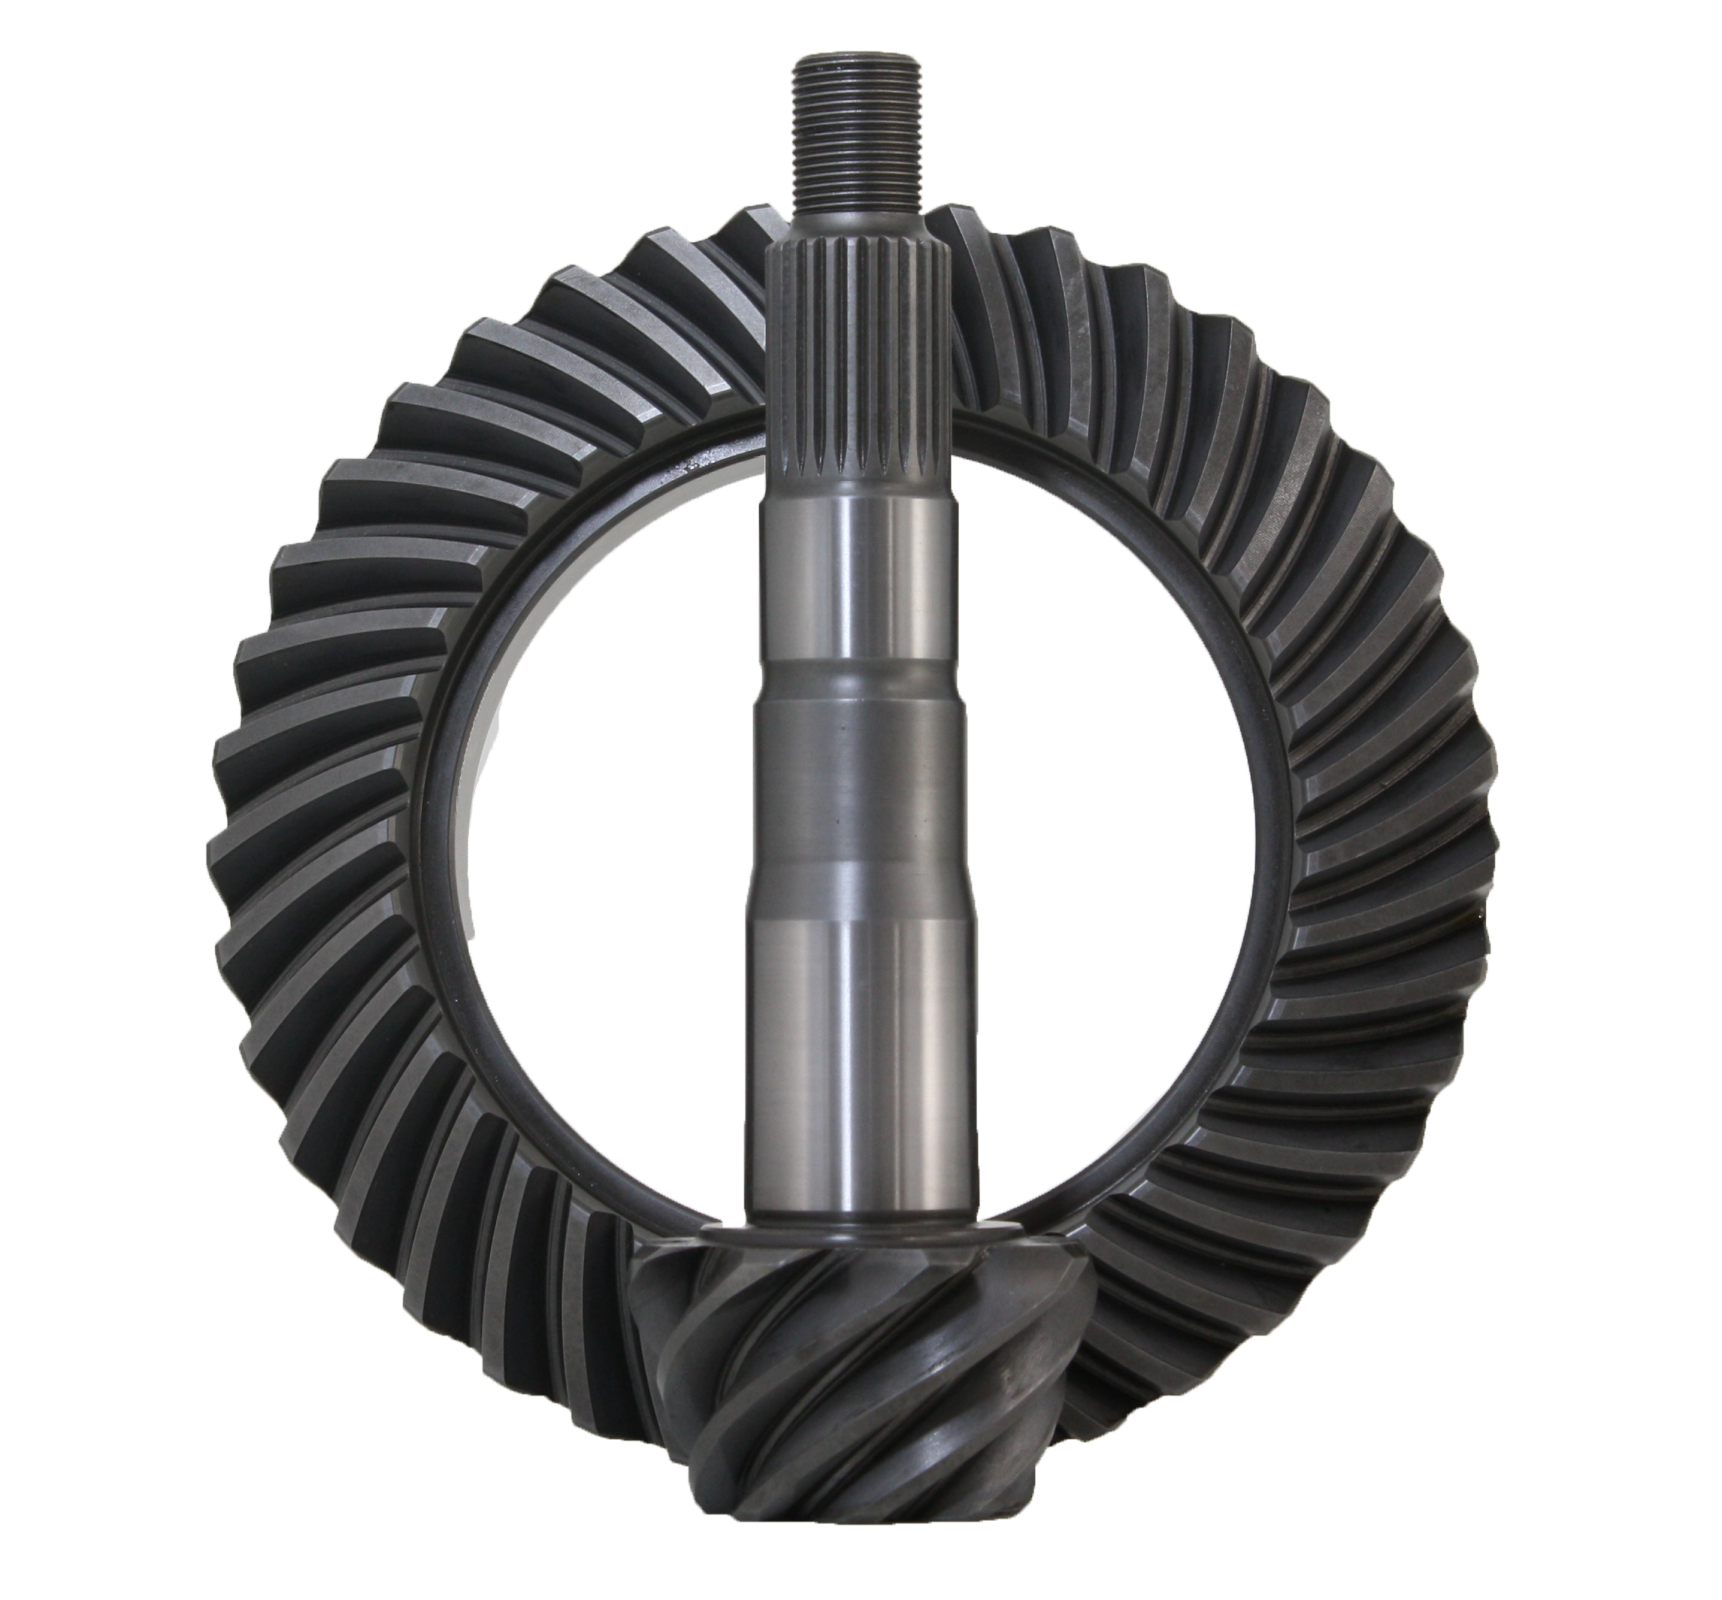 Toyota 8 Inch 4 Cyl 4.88 Ratio Reverse (29 Spline) Ring and Pinion Gear Set Revolution Gear and Axle